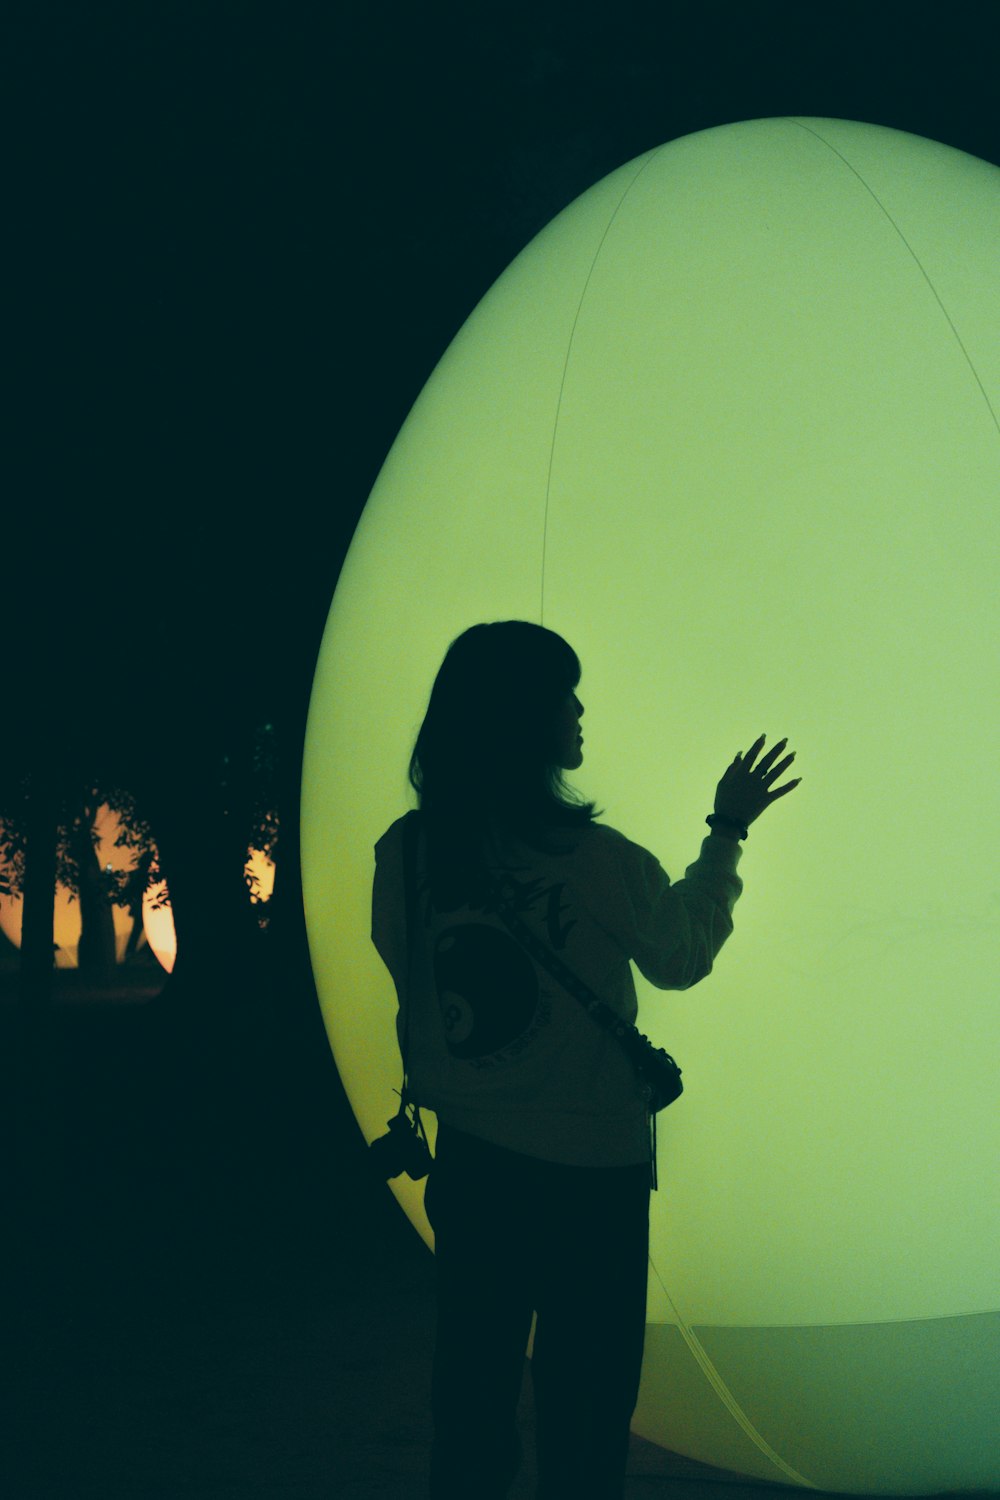 a woman standing in front of a large green ball